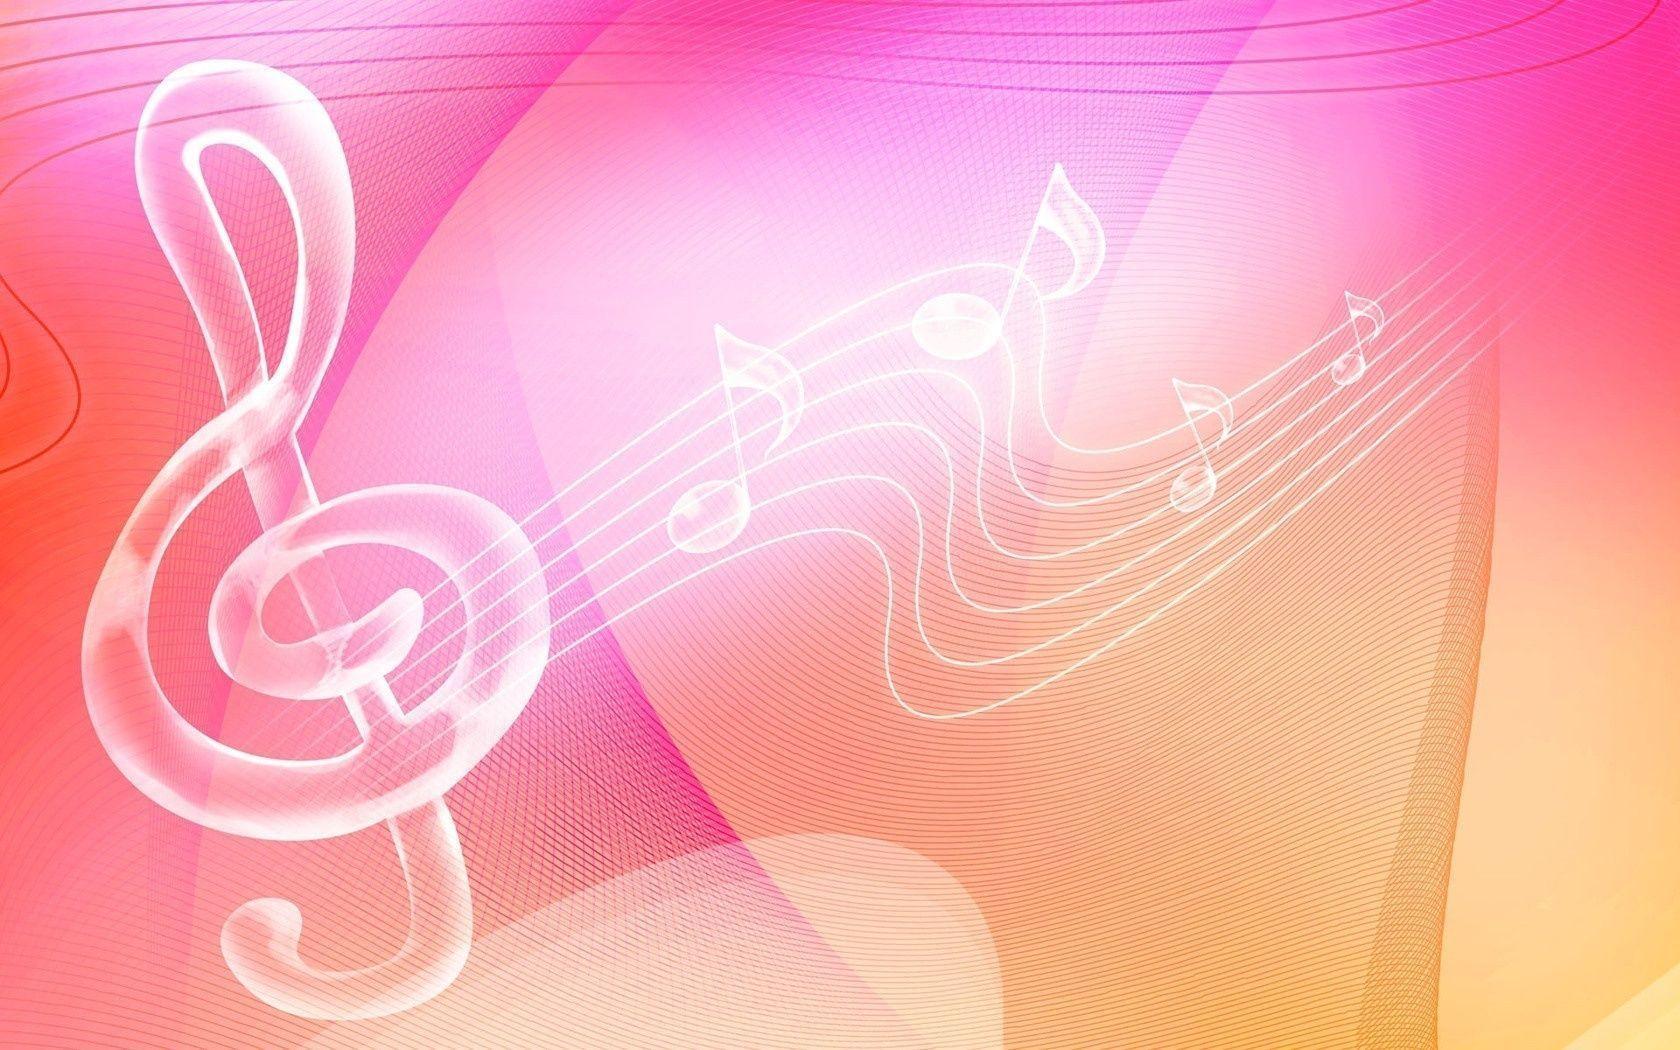 Save Pink Music Theme To Your Desired Location